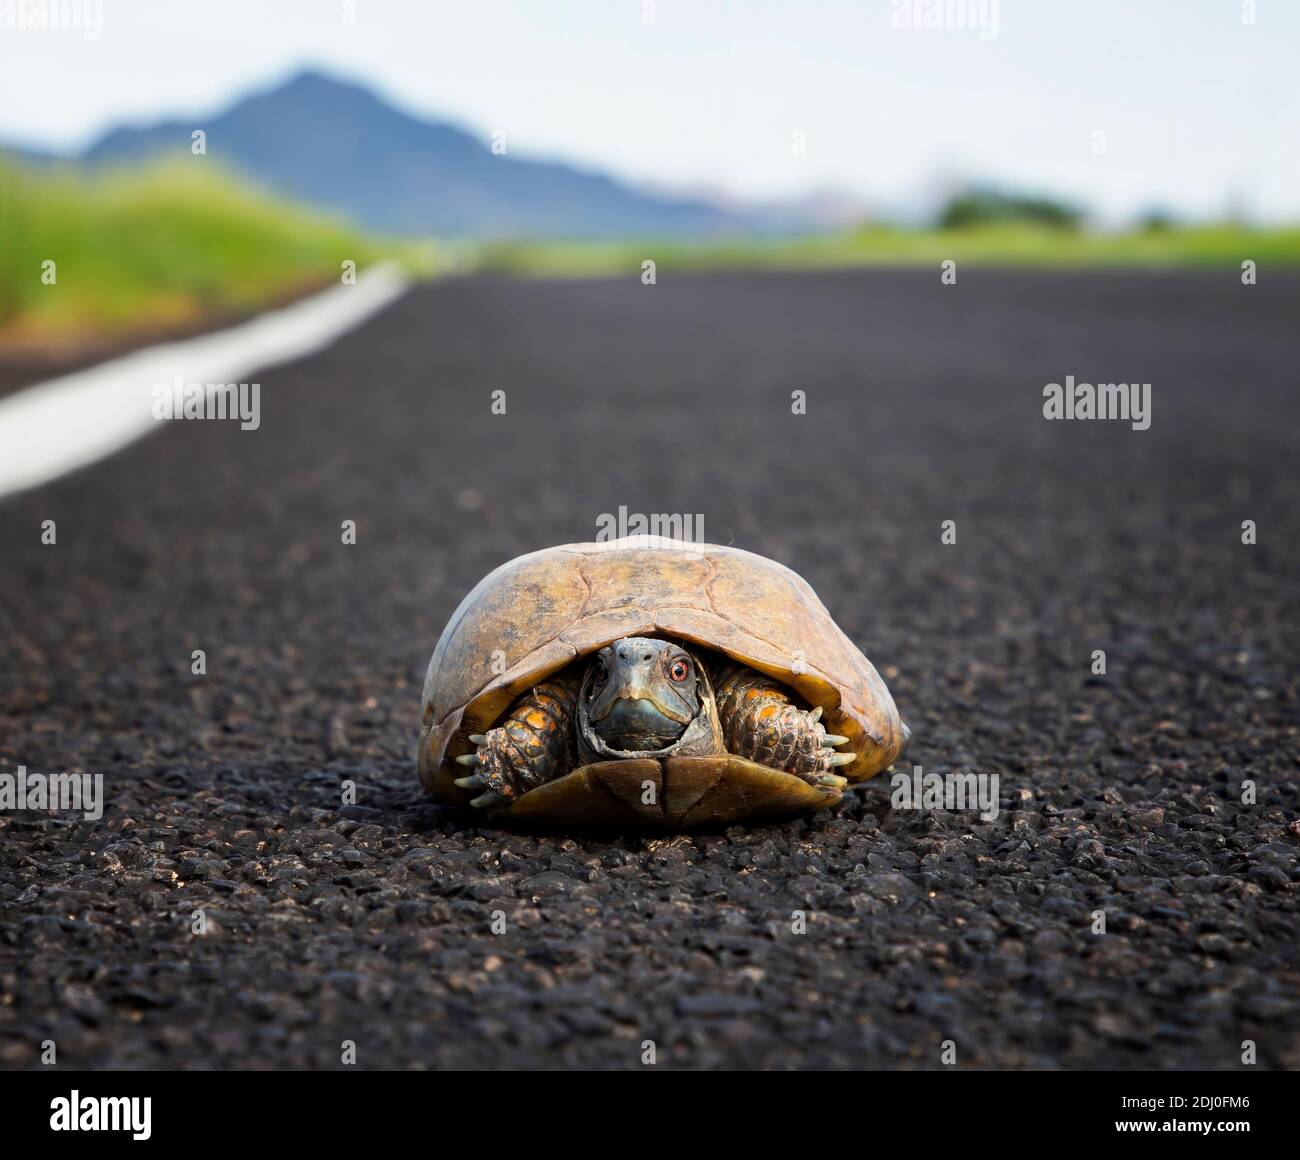 Male ornate or desert box turtle sits in roadway in Arizona desert low angle close up image. Stock Photo